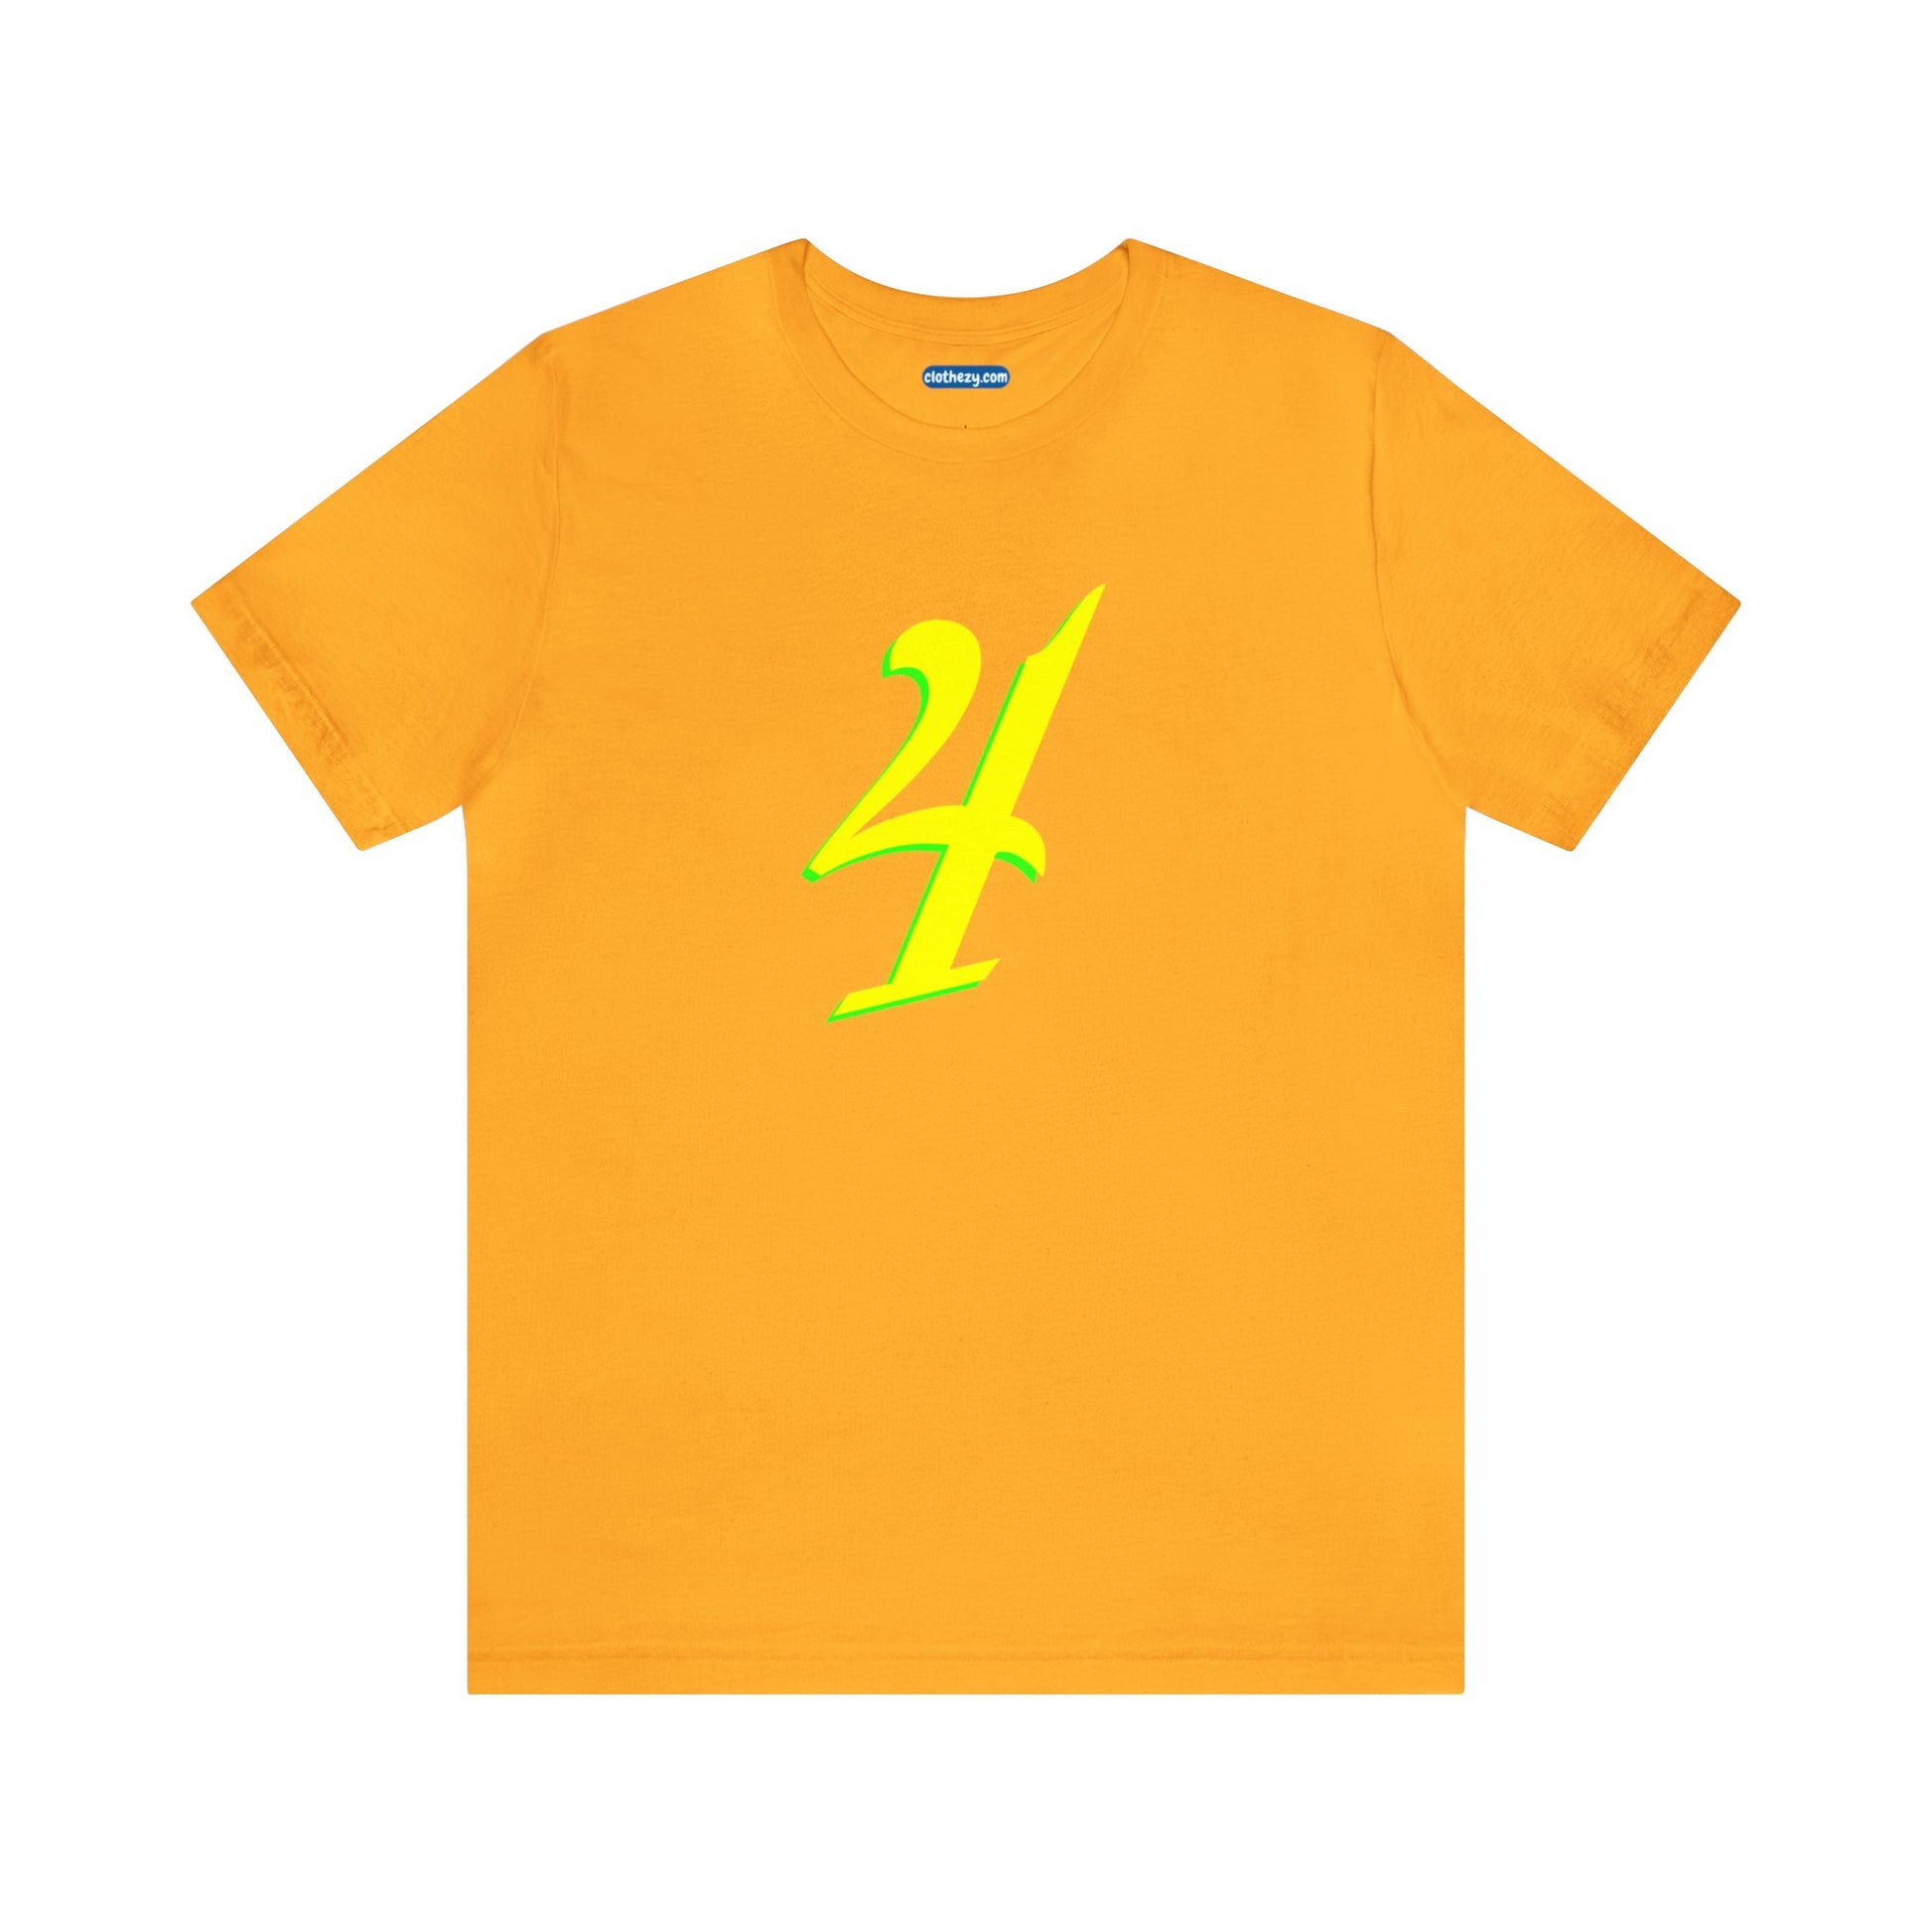 Number 4 Design - Soft Cotton Tee for birthdays and celebrations, Gift for friends and family, Multiple Options by clothezy.com in Gold Size Small - Buy Now